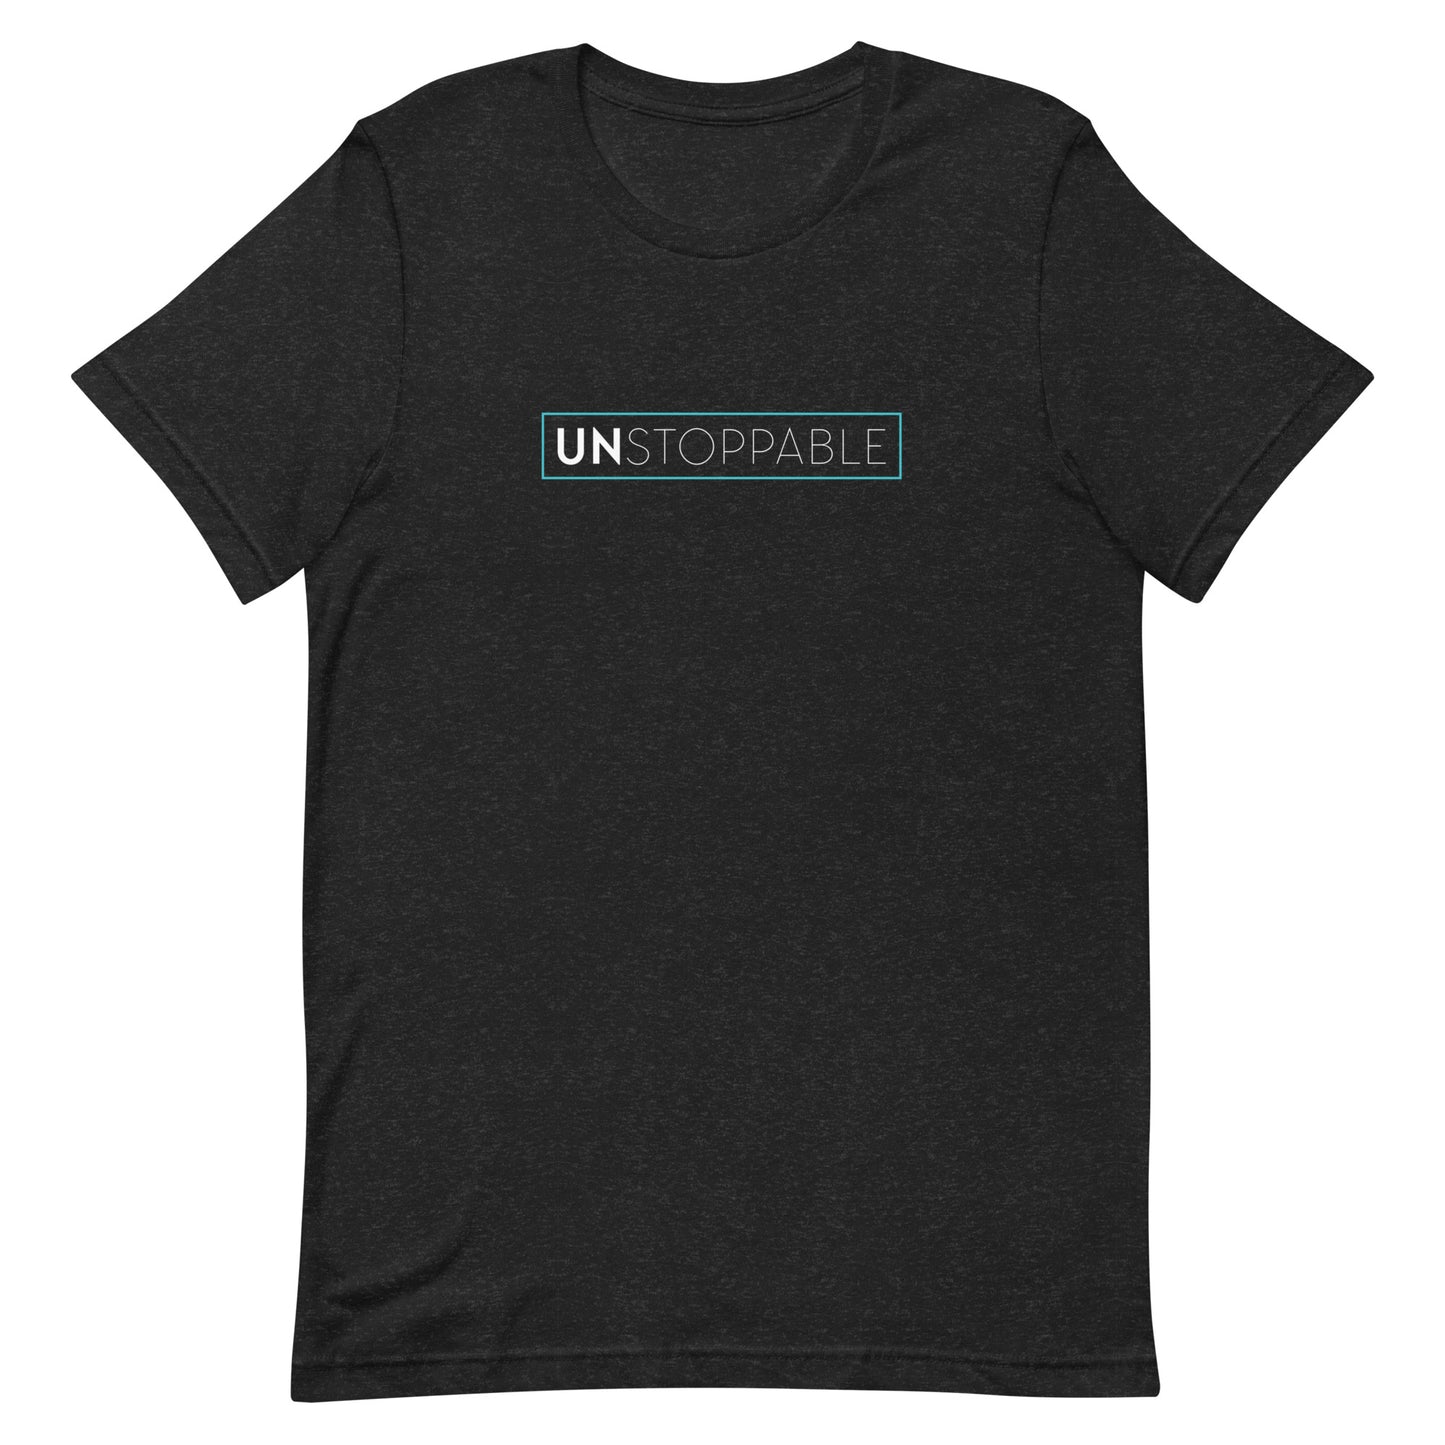 UnStoppable t-shirt